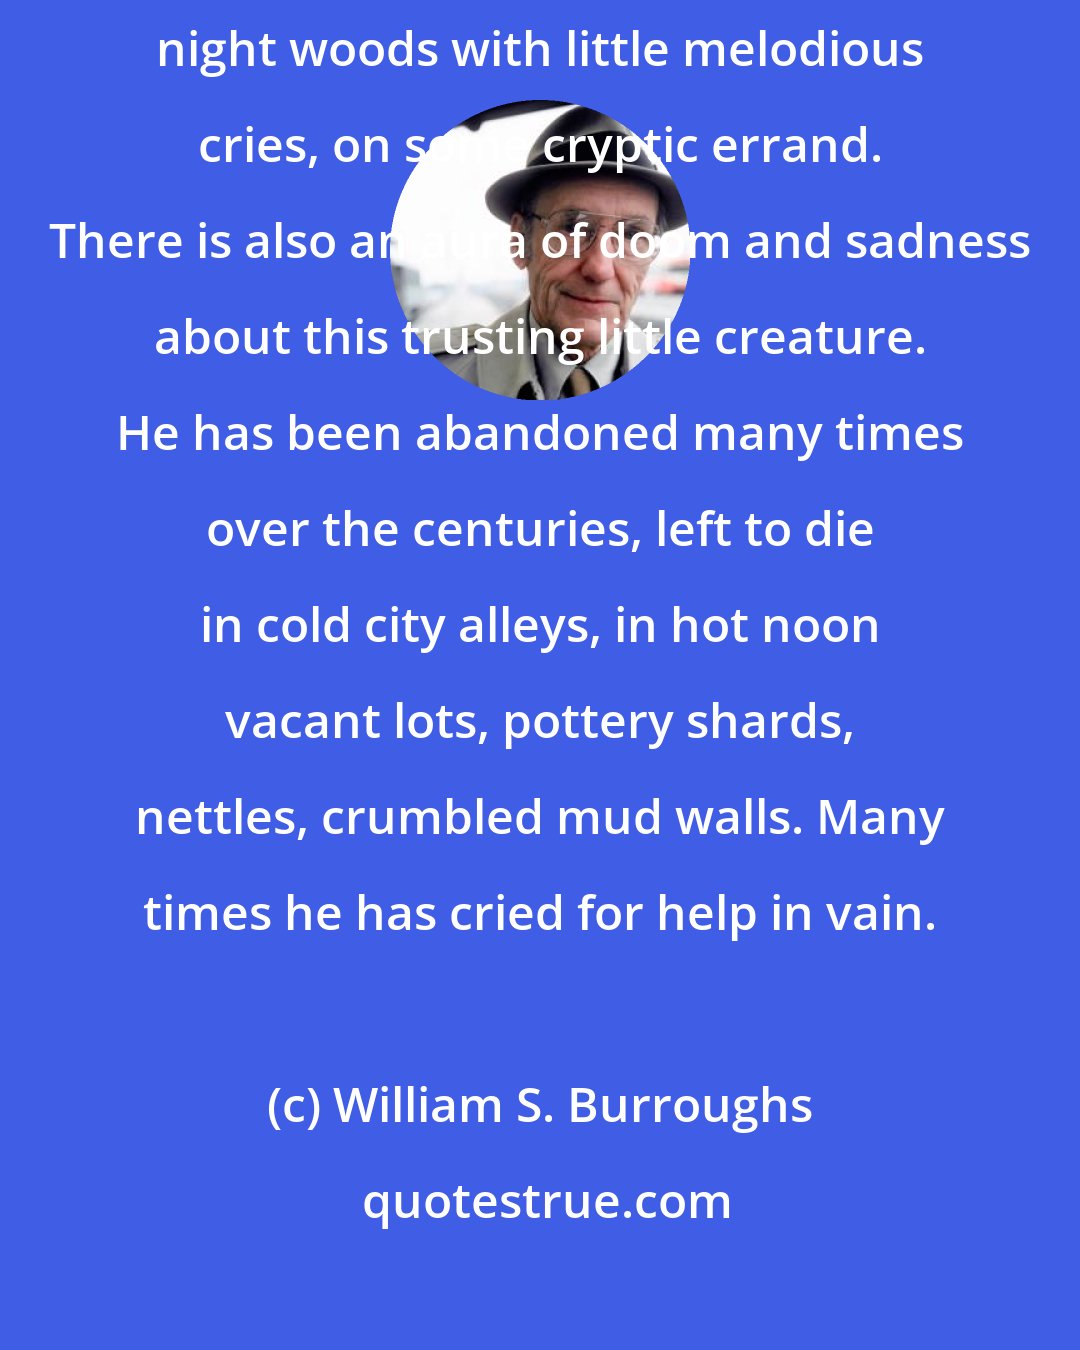 William S. Burroughs: His whole being radiates a pure, wild sweetness, flitting through night woods with little melodious cries, on some cryptic errand. There is also an aura of doom and sadness about this trusting little creature. He has been abandoned many times over the centuries, left to die in cold city alleys, in hot noon vacant lots, pottery shards, nettles, crumbled mud walls. Many times he has cried for help in vain.